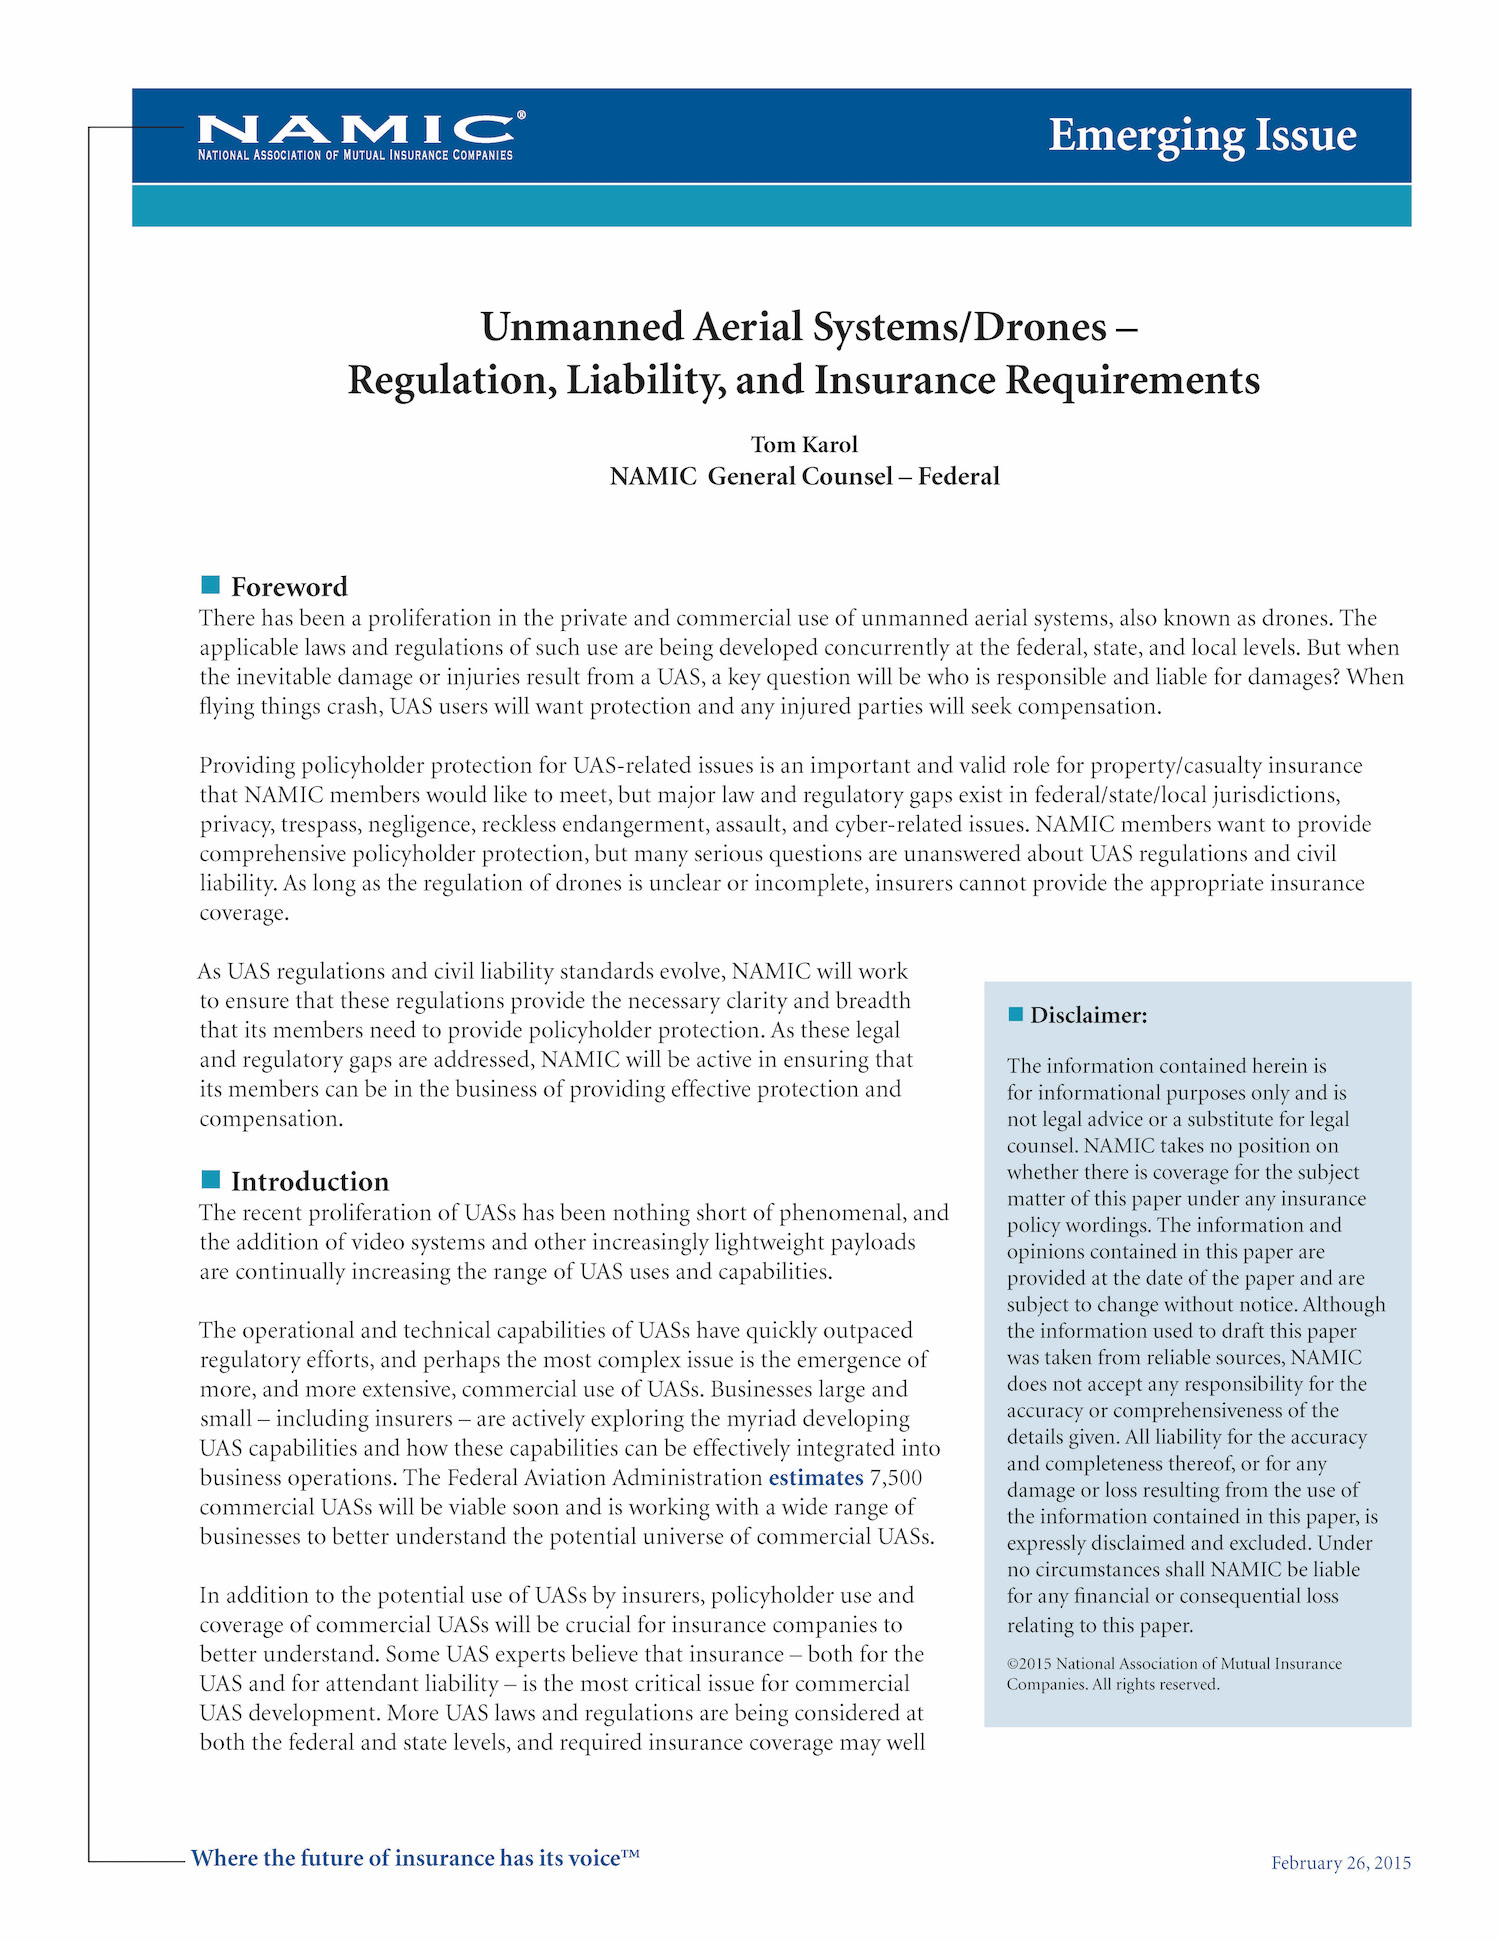 Unmanned Aerial Systems/Drones - Regulation, Liability and Insurance Requirements PDF